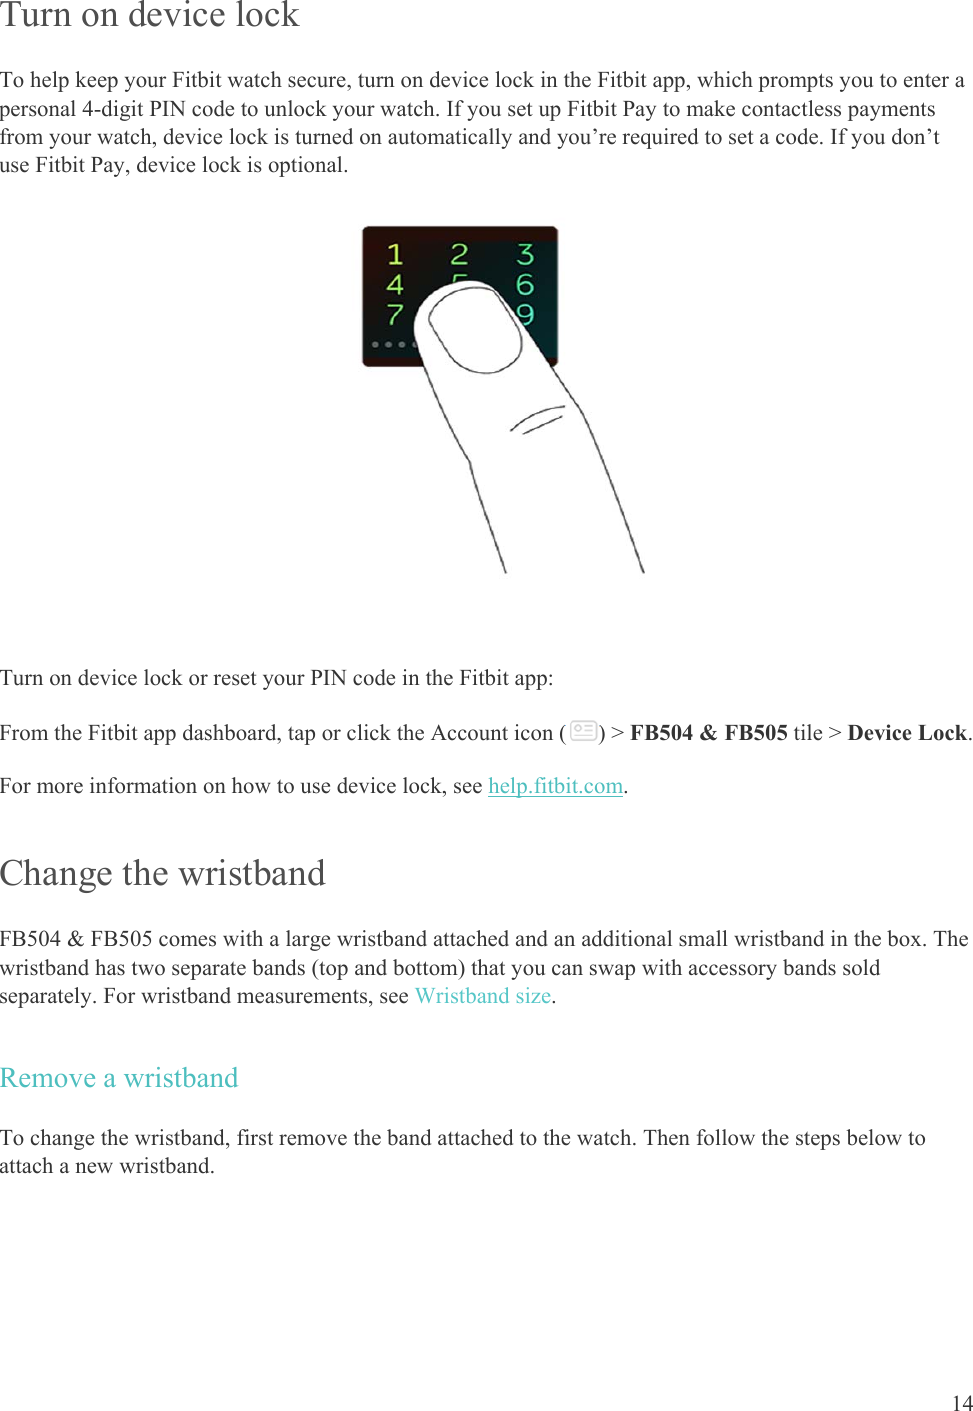    14 Turn on device lock  To help keep your Fitbit watch secure, turn on device lock in the Fitbit app, which prompts you to enter a personal 4-digit PIN code to unlock your watch. If you set up Fitbit Pay to make contactless payments from your watch, device lock is turned on automatically and you’re required to set a code. If you don’t use Fitbit Pay, device lock is optional.   Turn on device lock or reset your PIN code in the Fitbit app:  From the Fitbit app dashboard, tap or click the Account icon ( ) &gt; FB504 &amp; FB505 tile &gt; Device Lock. For more information on how to use device lock, see help.fitbit.com. Change the wristband FB504 &amp; FB505 comes with a large wristband attached and an additional small wristband in the box. The wristband has two separate bands (top and bottom) that you can swap with accessory bands sold separately. For wristband measurements, see Wristband size. Remove a wristband To change the wristband, first remove the band attached to the watch. Then follow the steps below to attach a new wristband. 